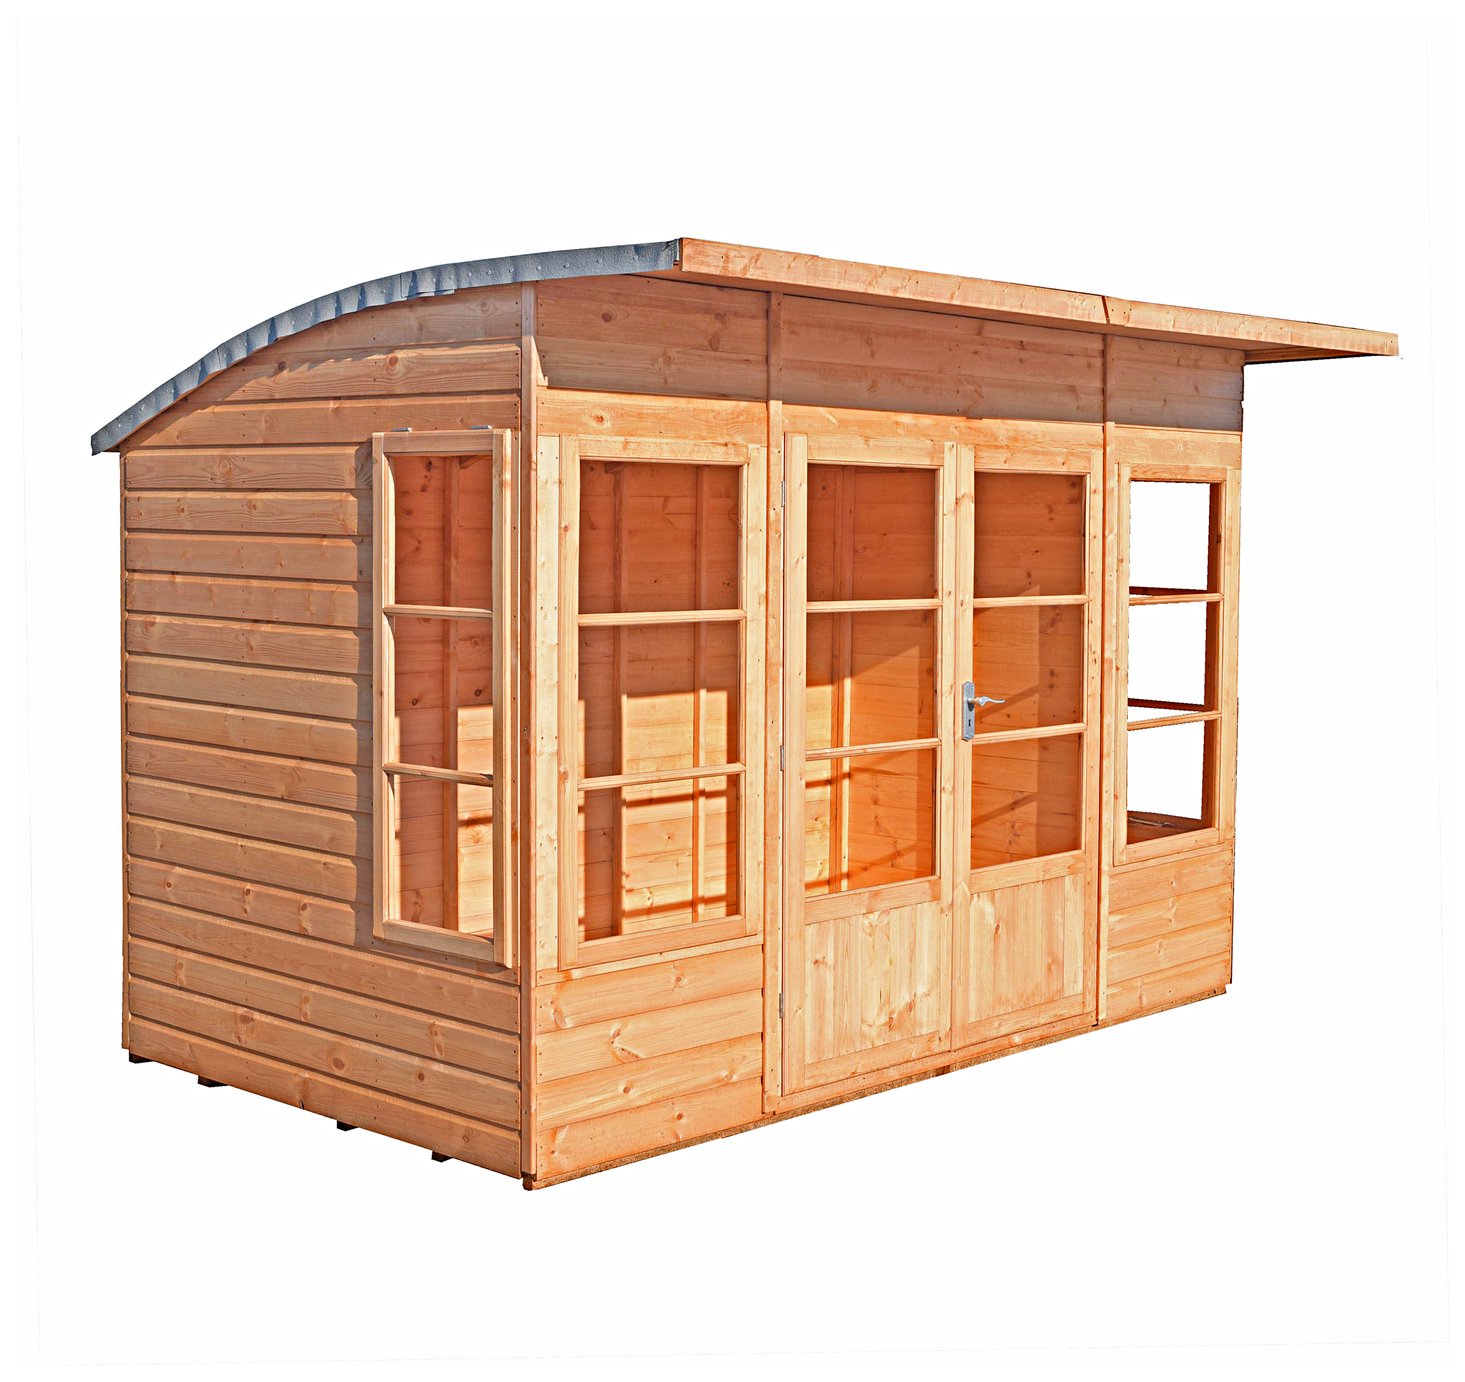 Homewood Orchid Summerhouse 10 x 6ft review